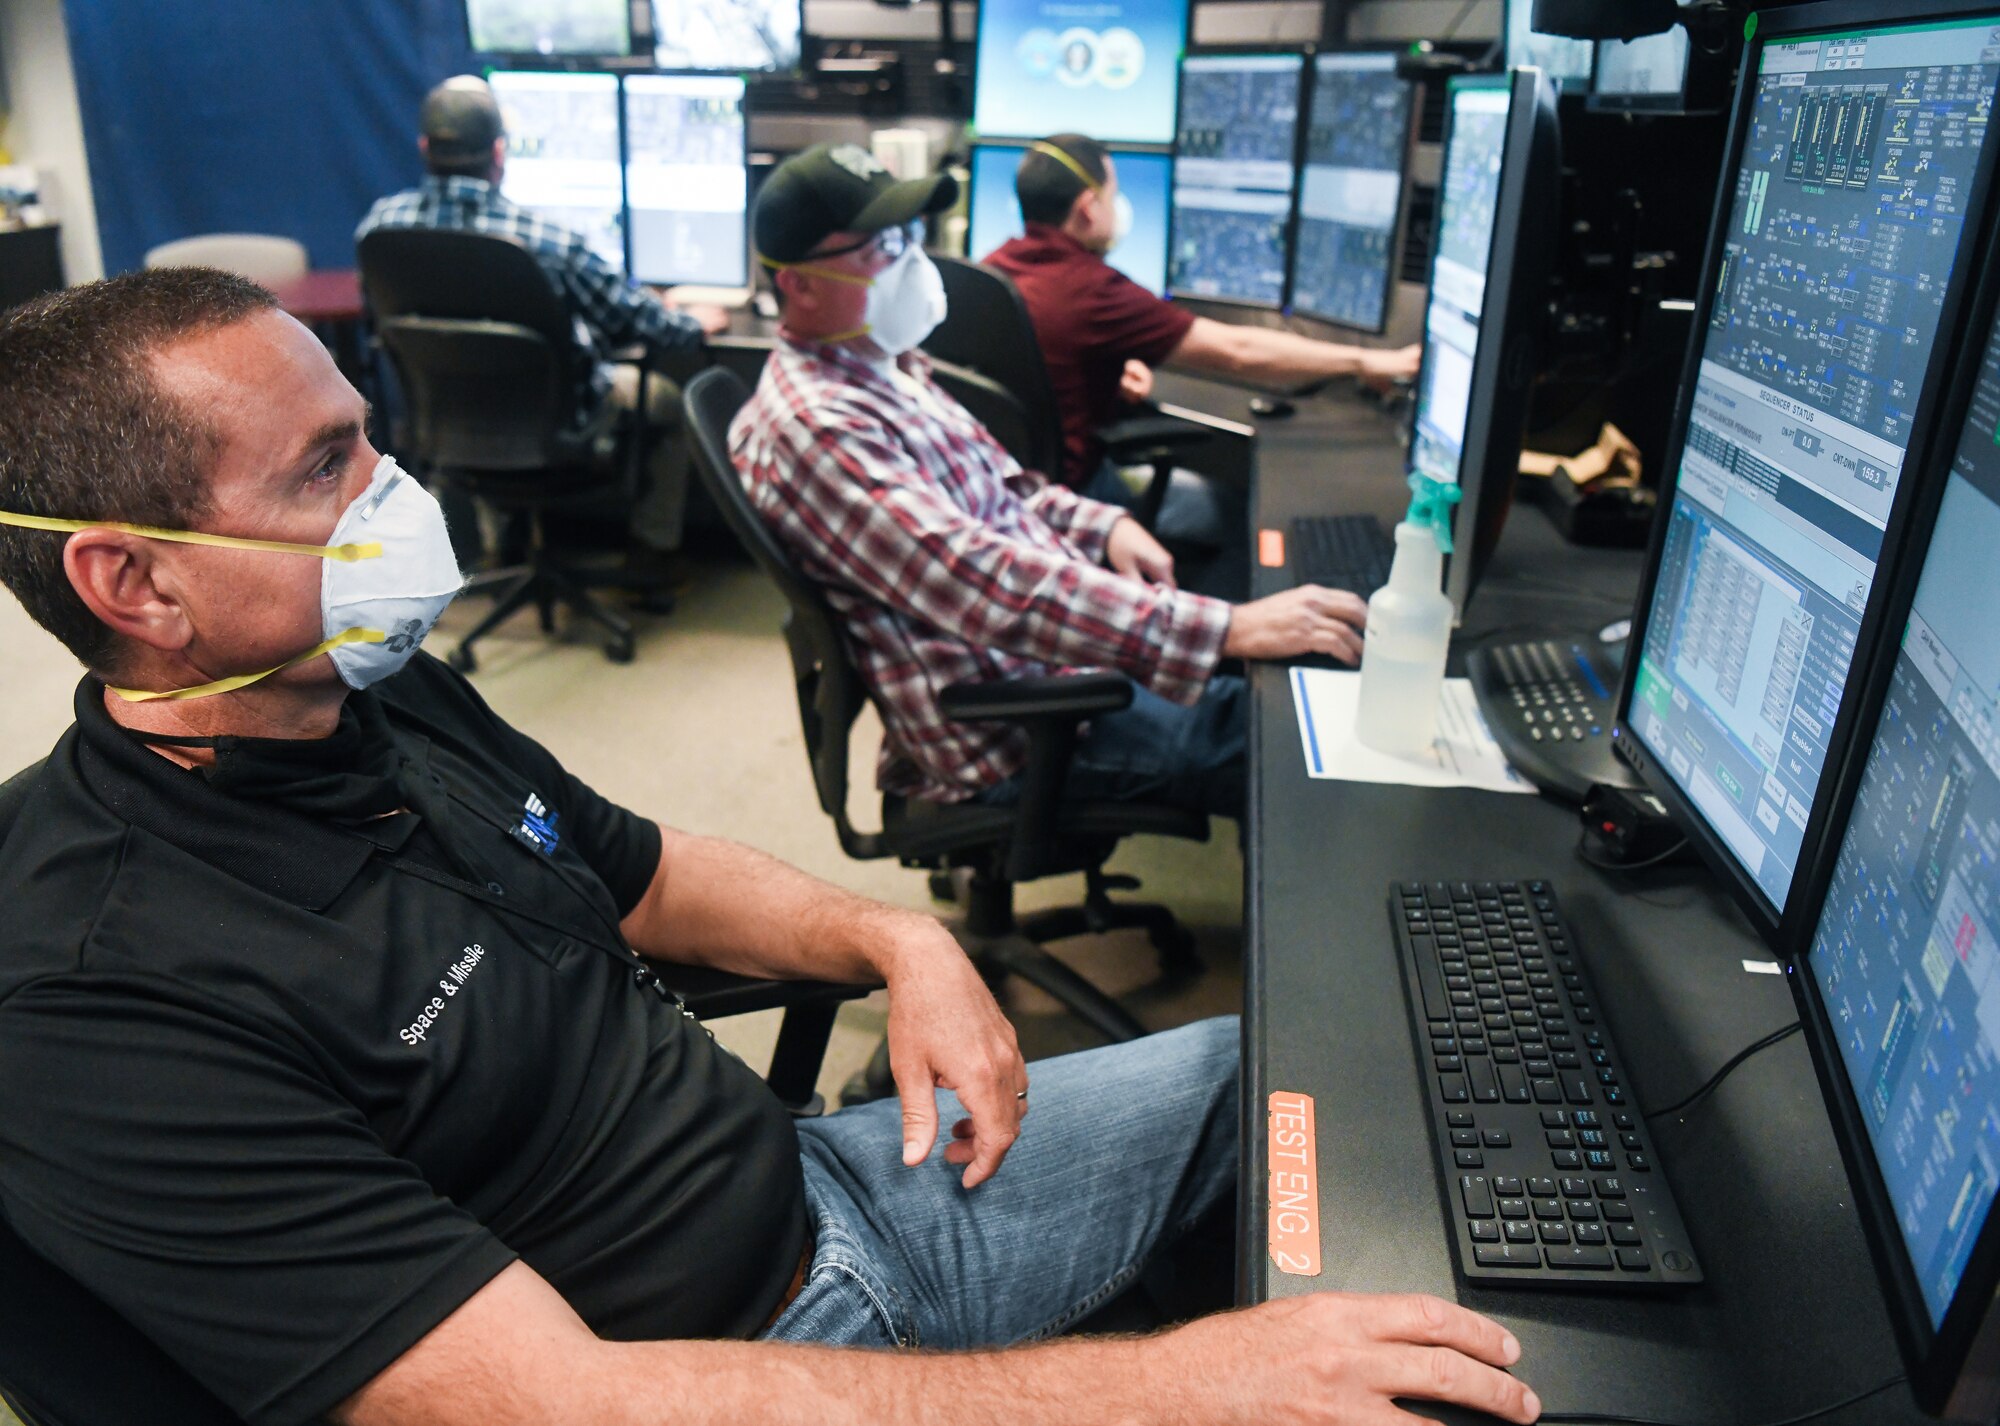 Daryl Osteen, left, a test operations engineer, John VanScoten, an outside machinist, and other Team AEDC personnel work in the control room of the Arnold Engineering Development Complex (AEDC) Aerodynamic and Propulsion Test Unit (APTU), May 20, 2020, while wearing masks to help mitigate risk associated with the coronavirus pandemic. The APTU team has performed their tasks, providing hypersonic testing capabilities, without interruption during the pandemic. Hypersonics is considered a critical field for national defense. (U.S. Air Force photo by Jill Pickett)